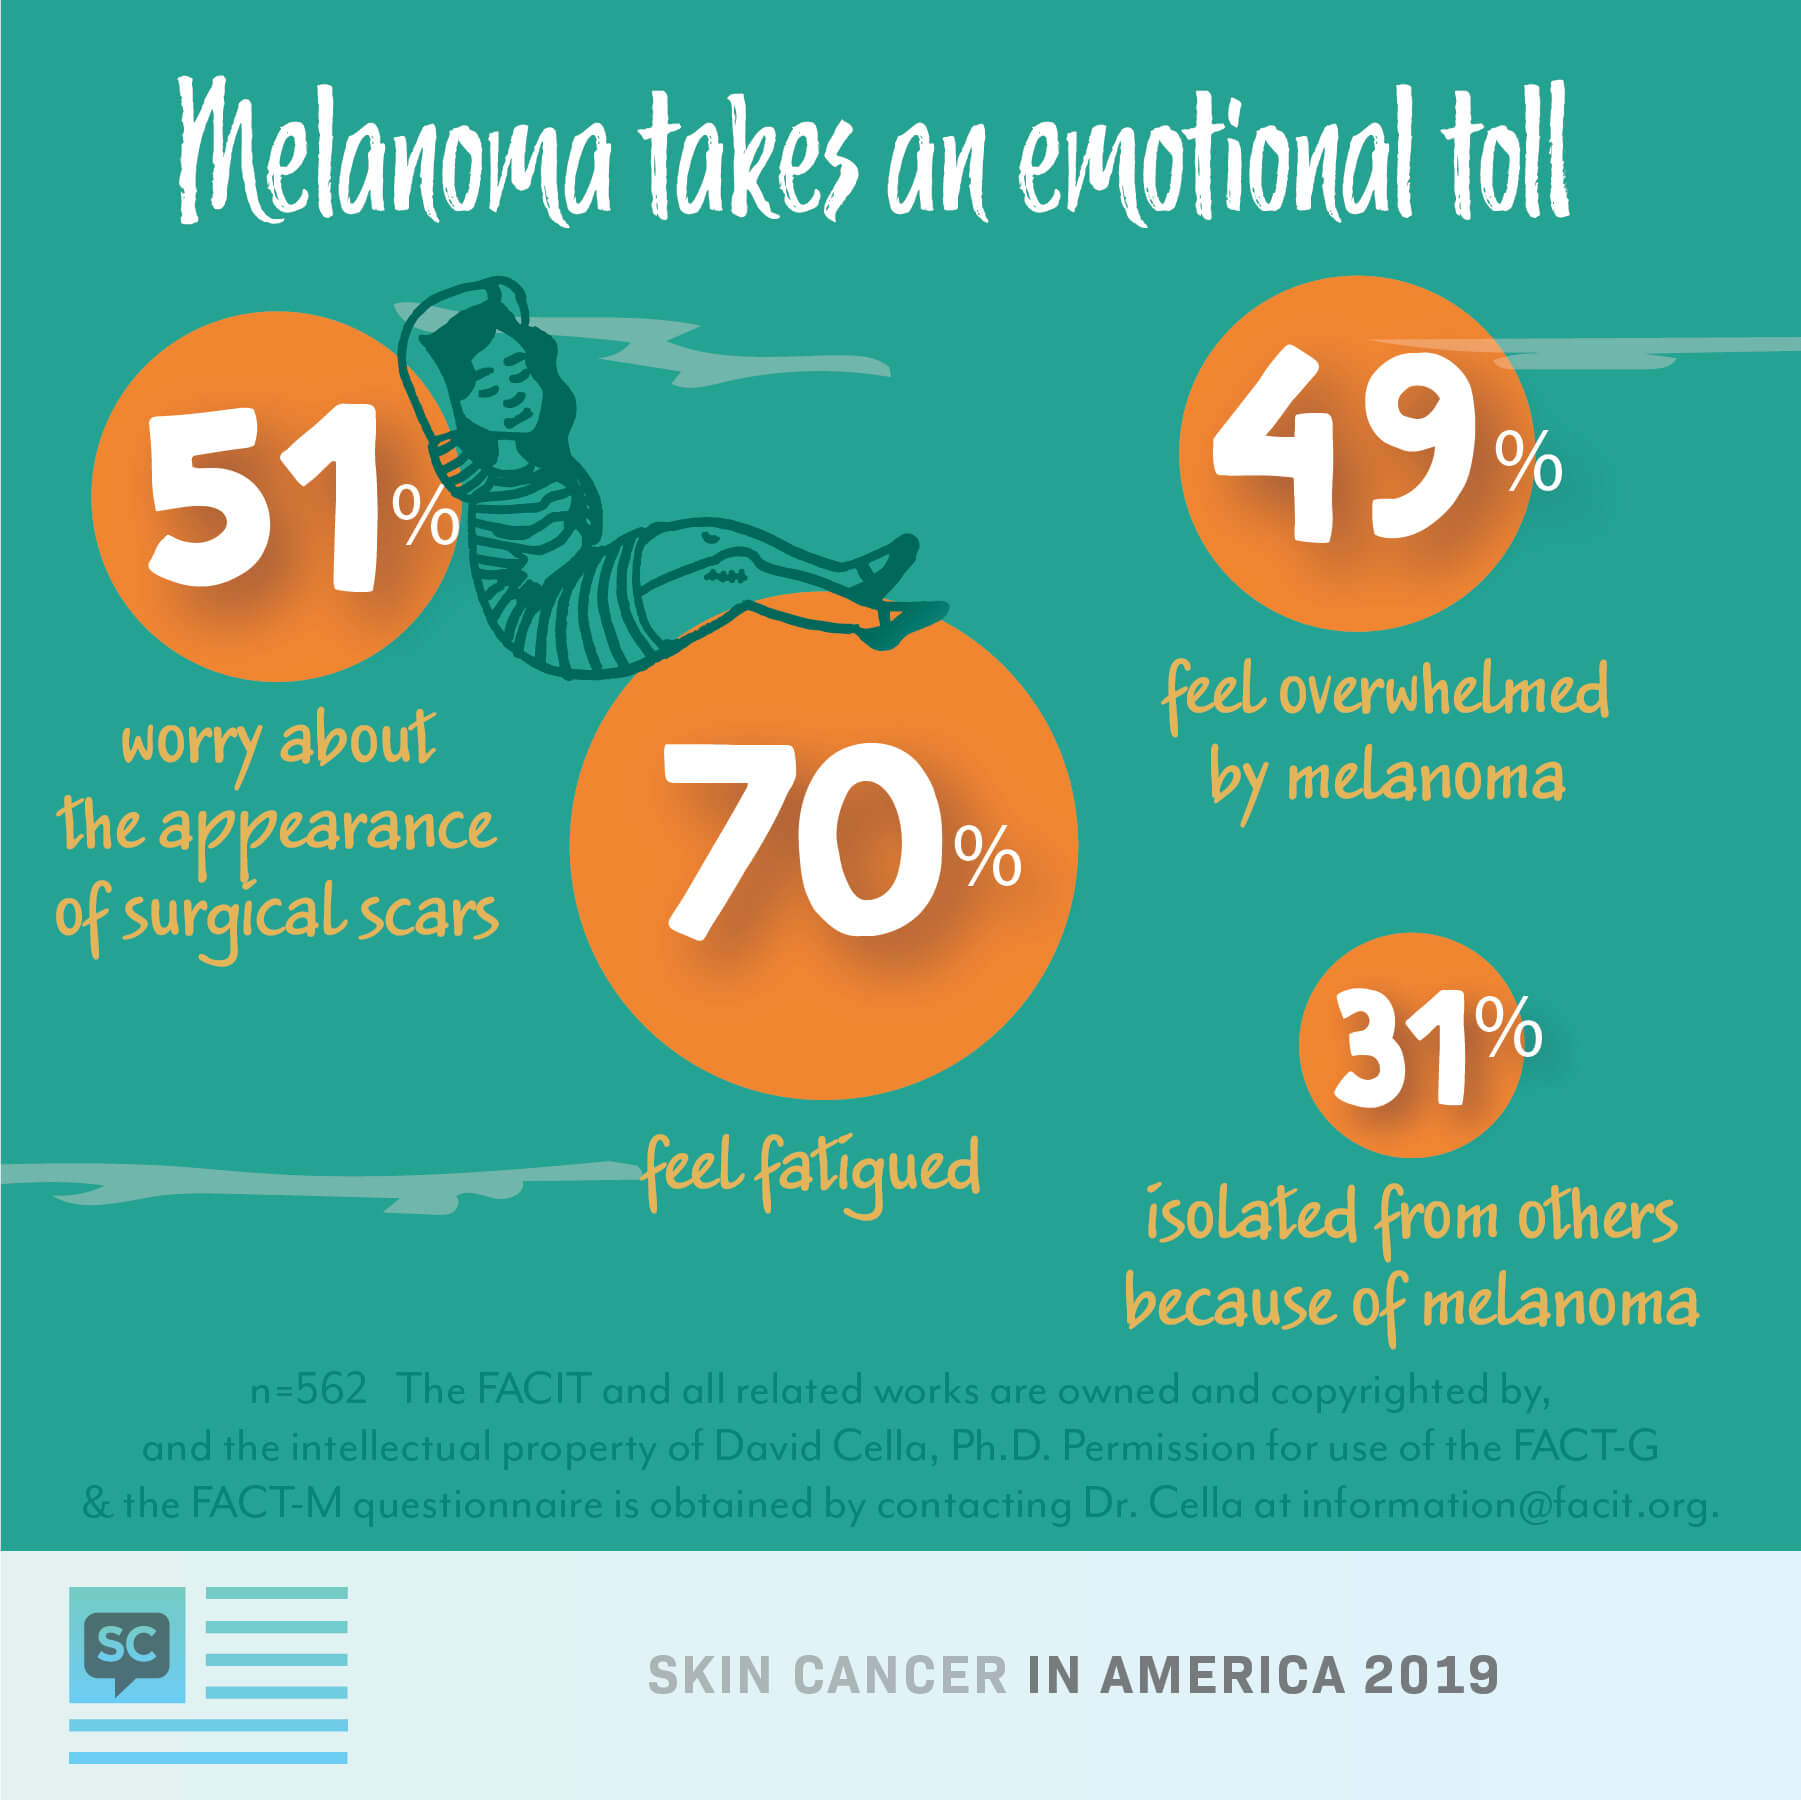 Melanoma respondents: worry about scars (51%), feel fatigued (70%), feel overwhelmed by melanoma (49%), feel isolated (31%)